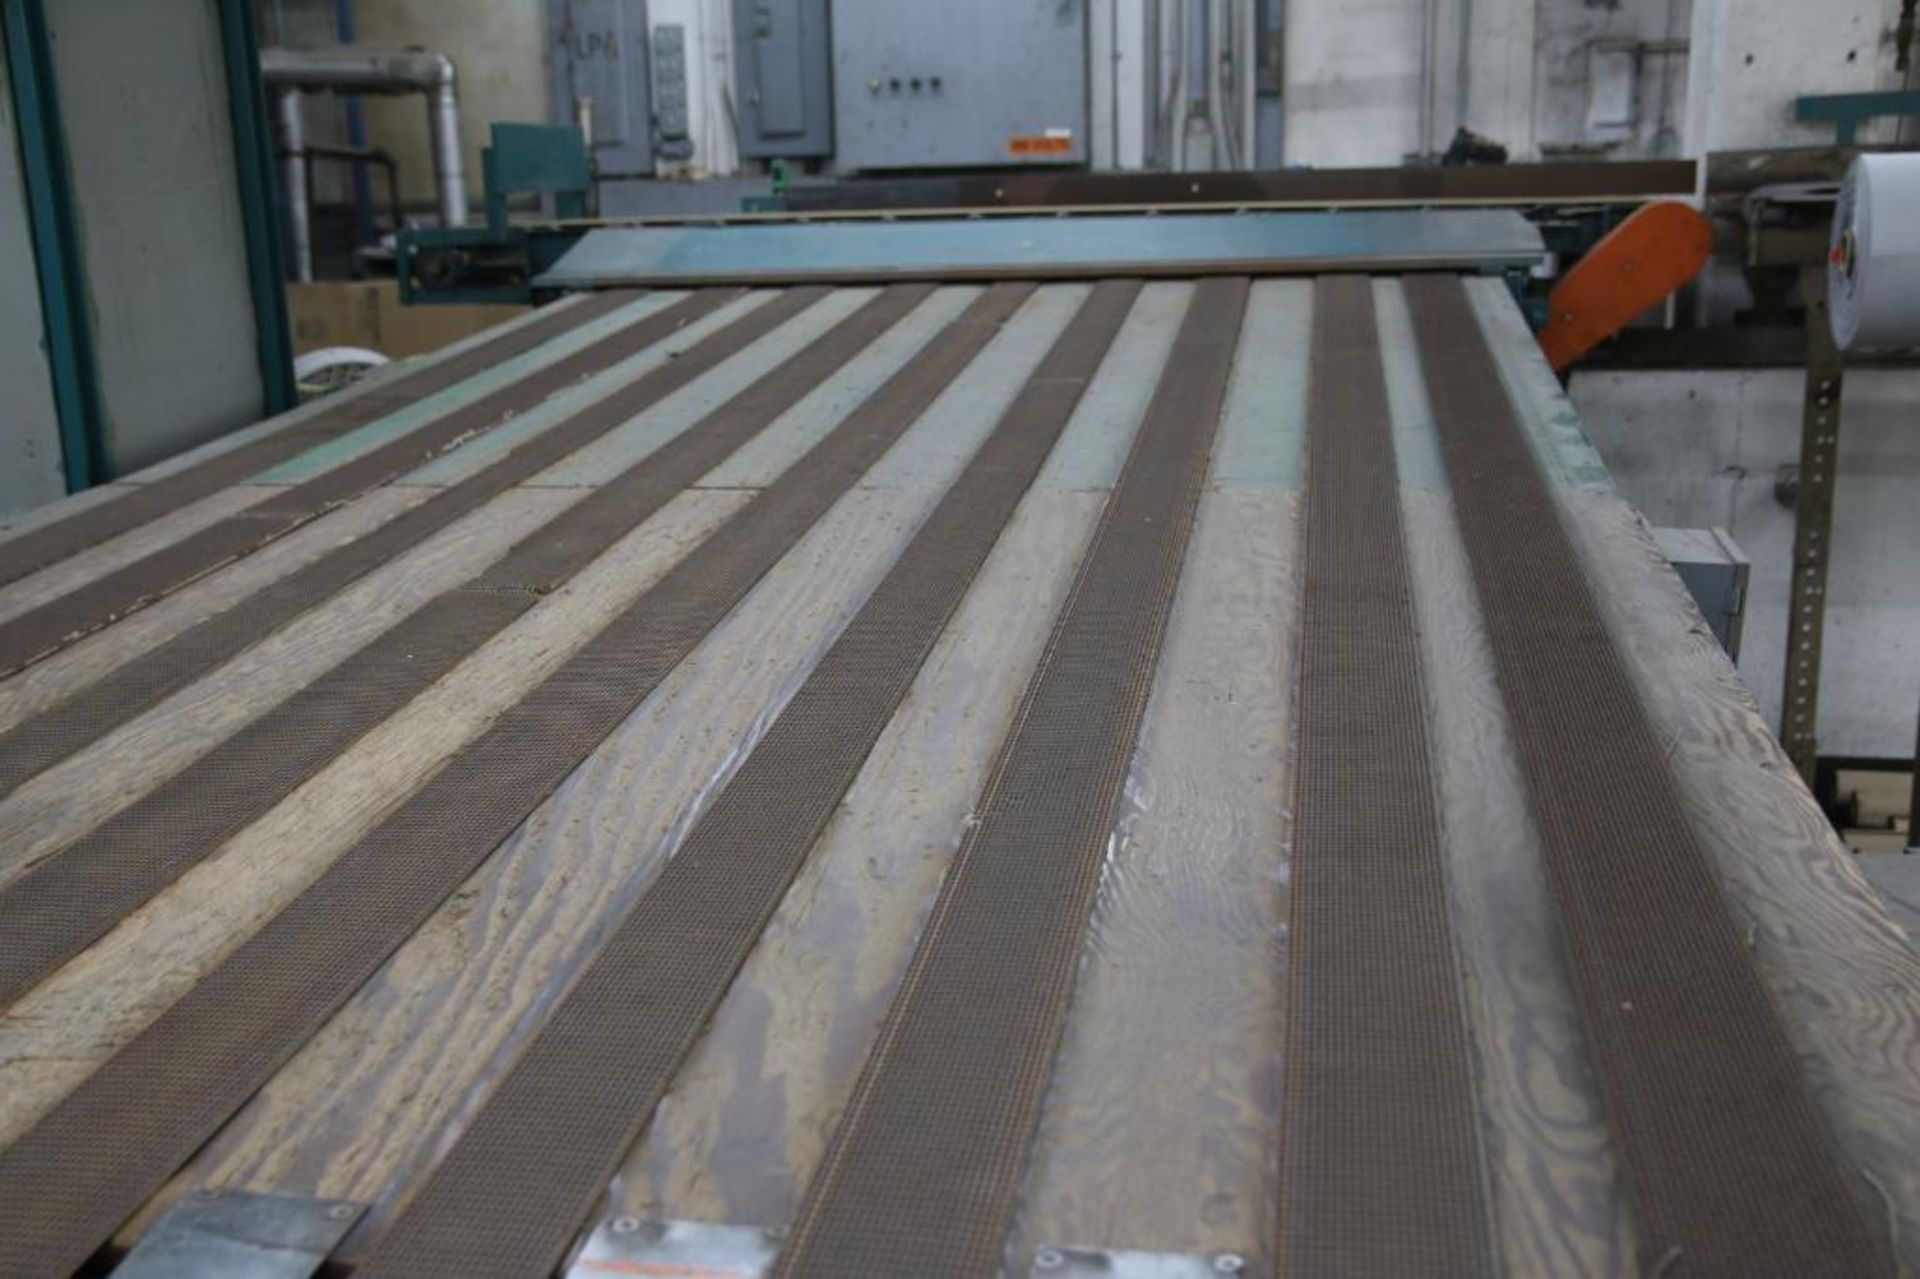 Conveyor Lines with Conveyor Driven Wrapping Table - Image 2 of 9